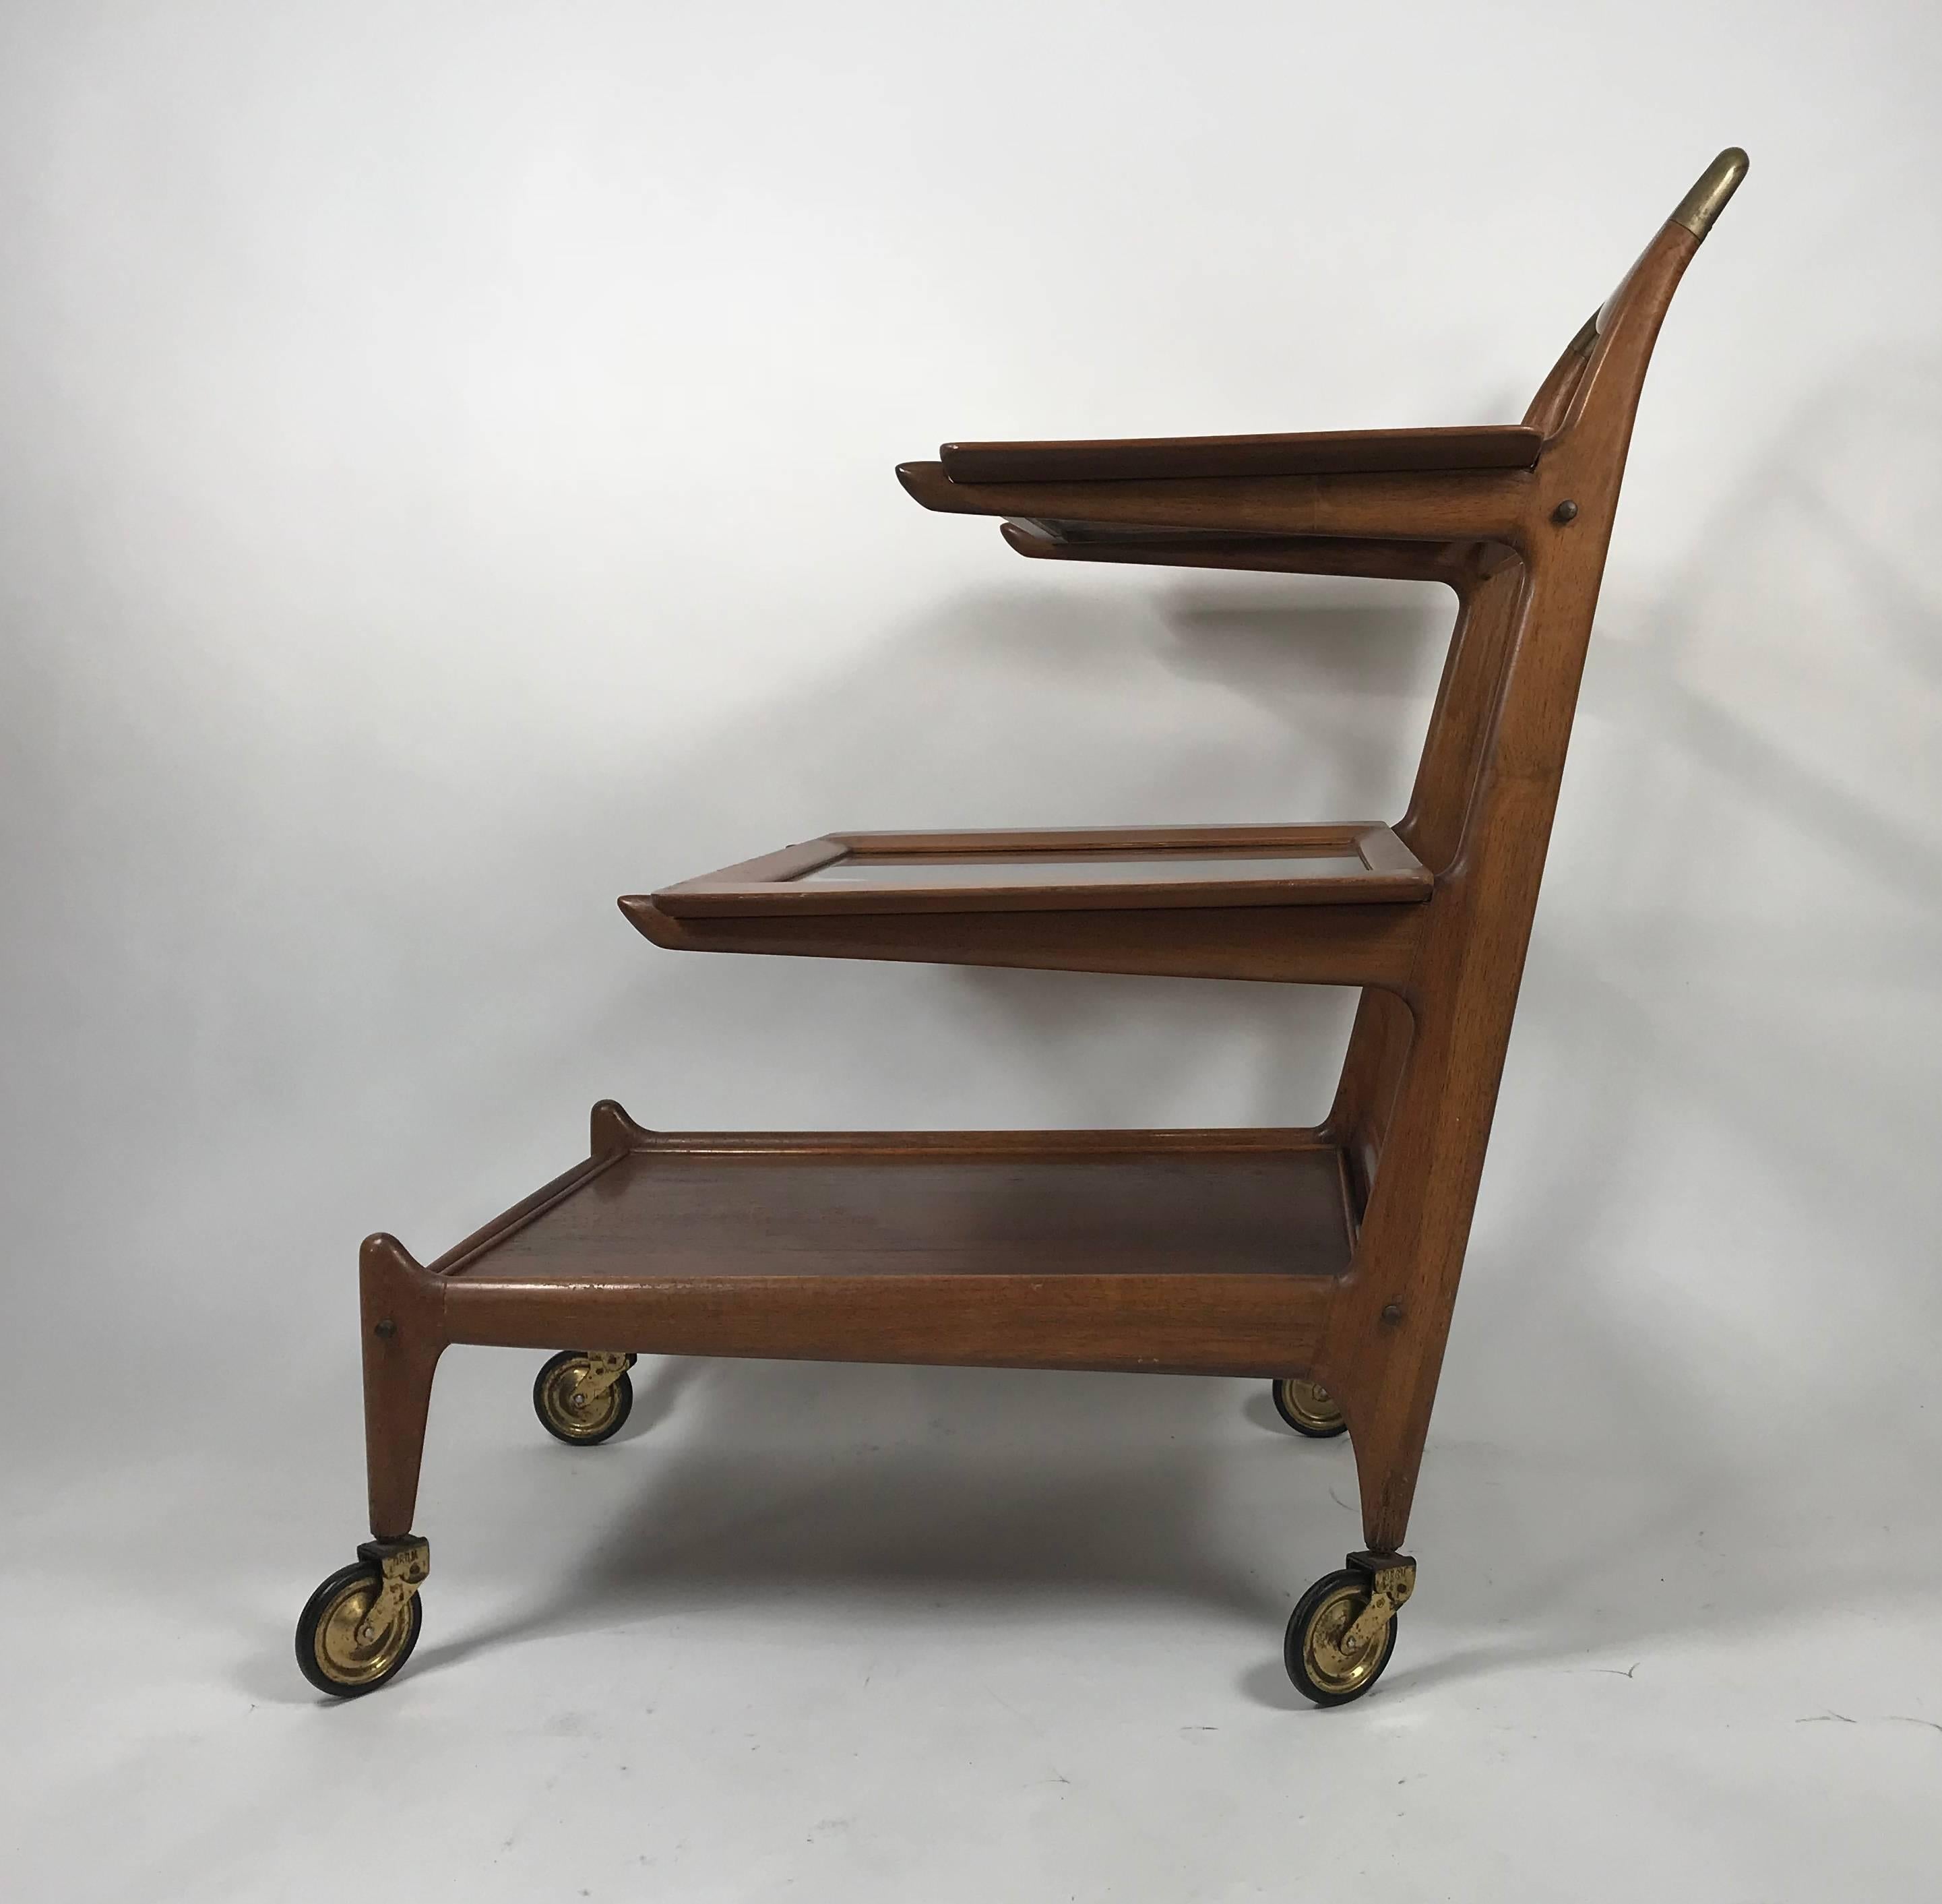 Organic trolley from the 1950s, Italian design by Cesare Lacca, beautiful sculpted walnut. Three removable trays, brass mountings. Made in Italy. Hand delivery avail to New York City or anywhere en route from Buffalo New York.